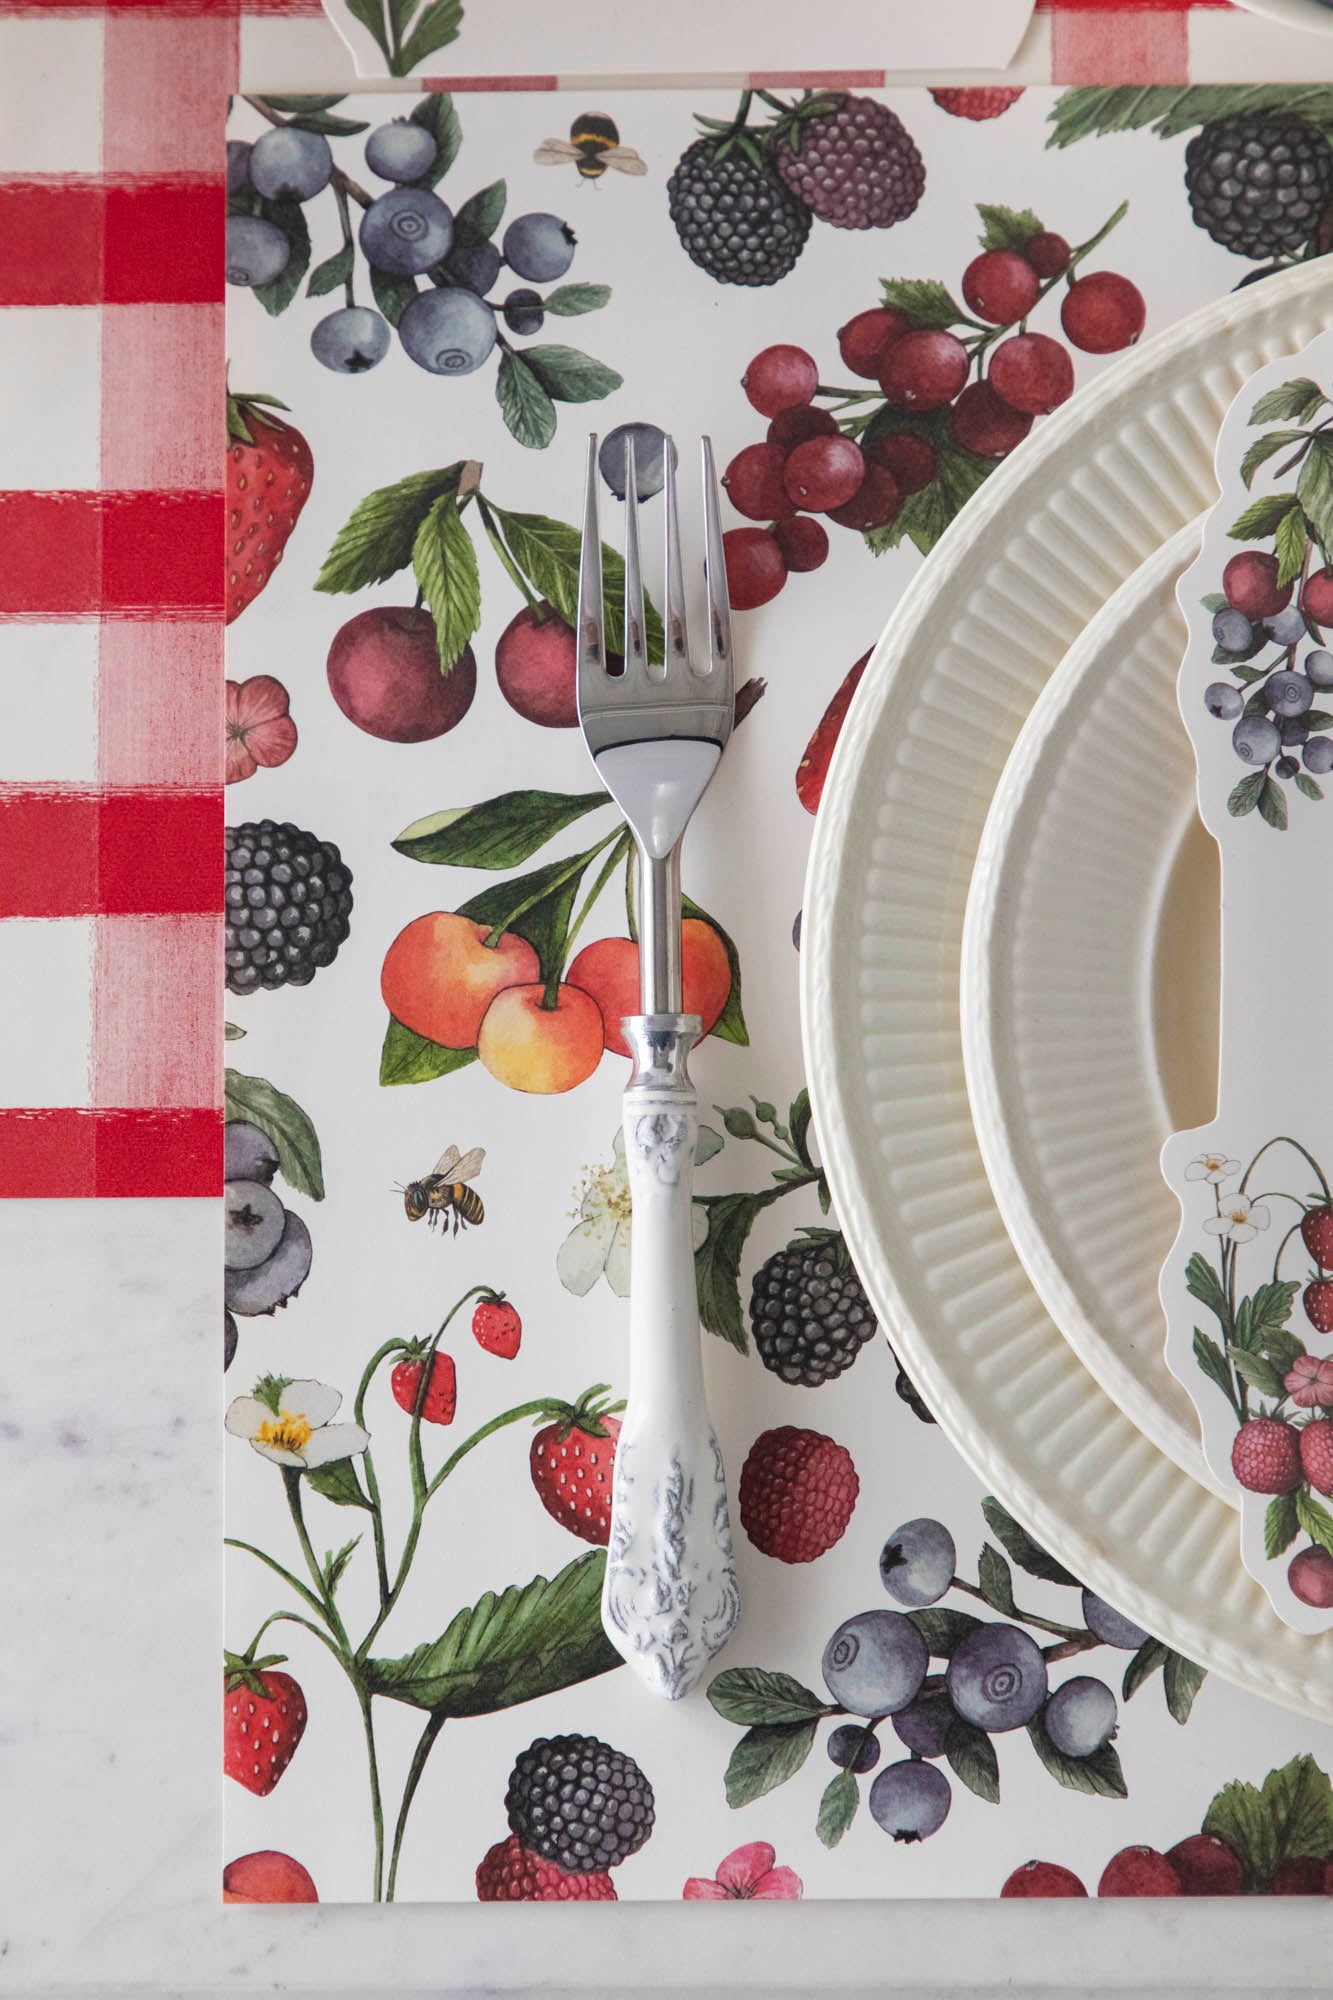 Close-up of the Wild Berry Placemat under an elegant summertime place setting, from above.